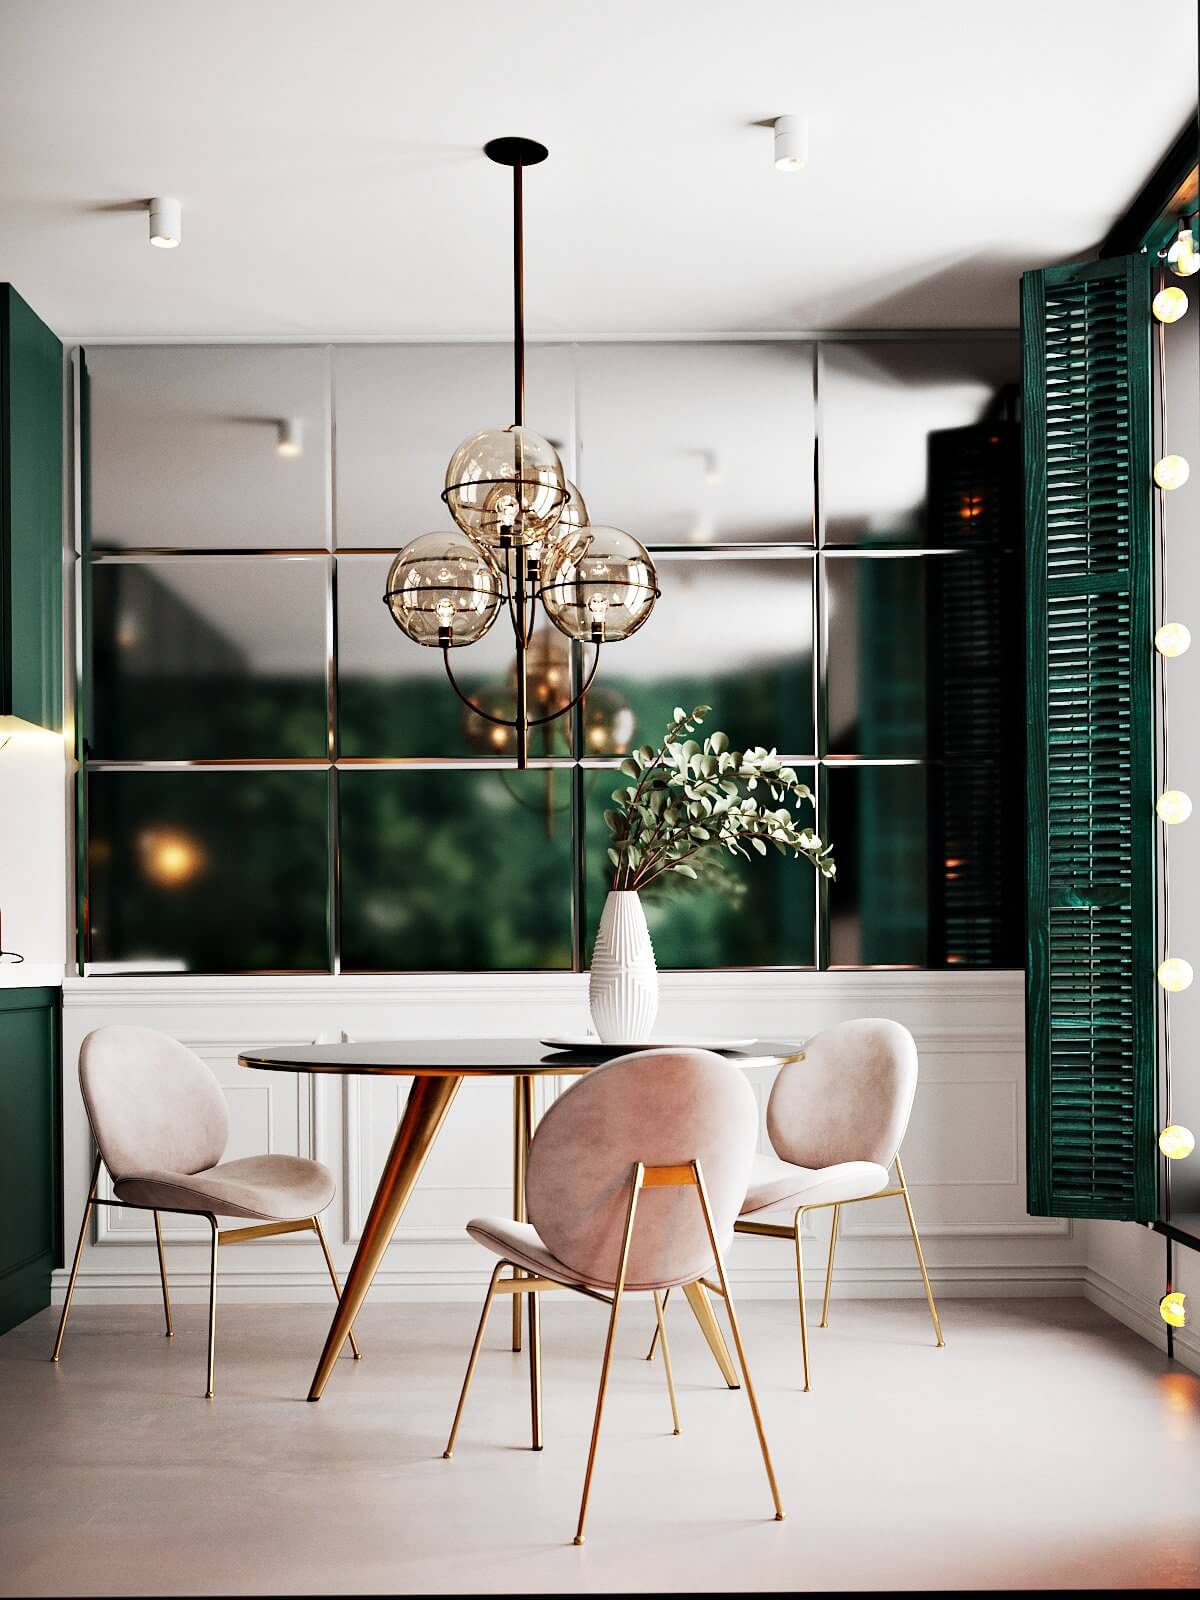 New York concept house dining room - cgi visualization